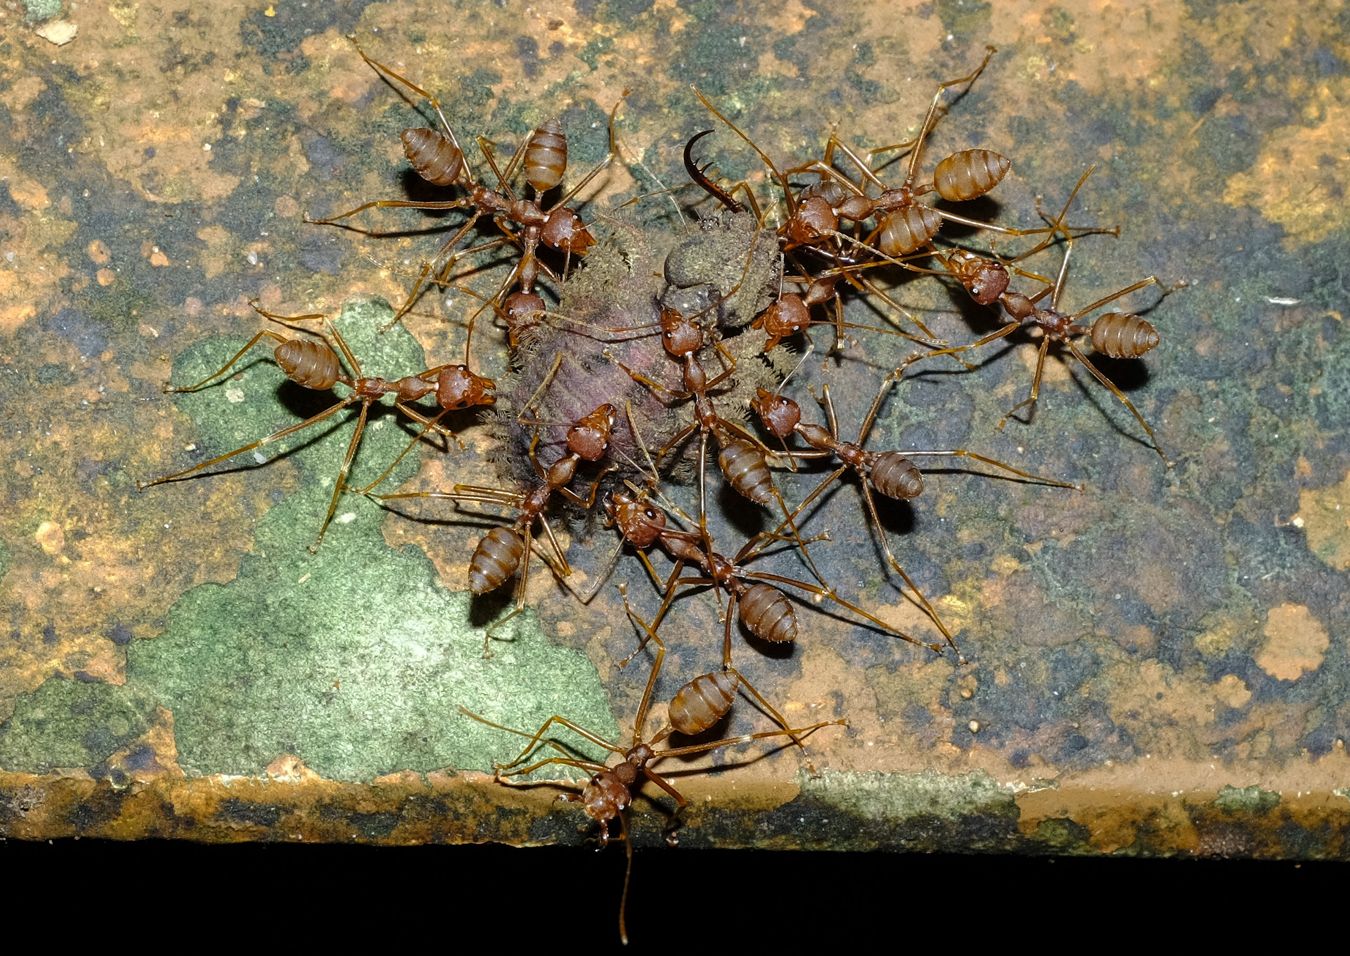 A Group of Asian Weaver Ant { Oecophylla Smaragdina } Carried a Antlion Larvae { Neuroptera Myrmelontidae }